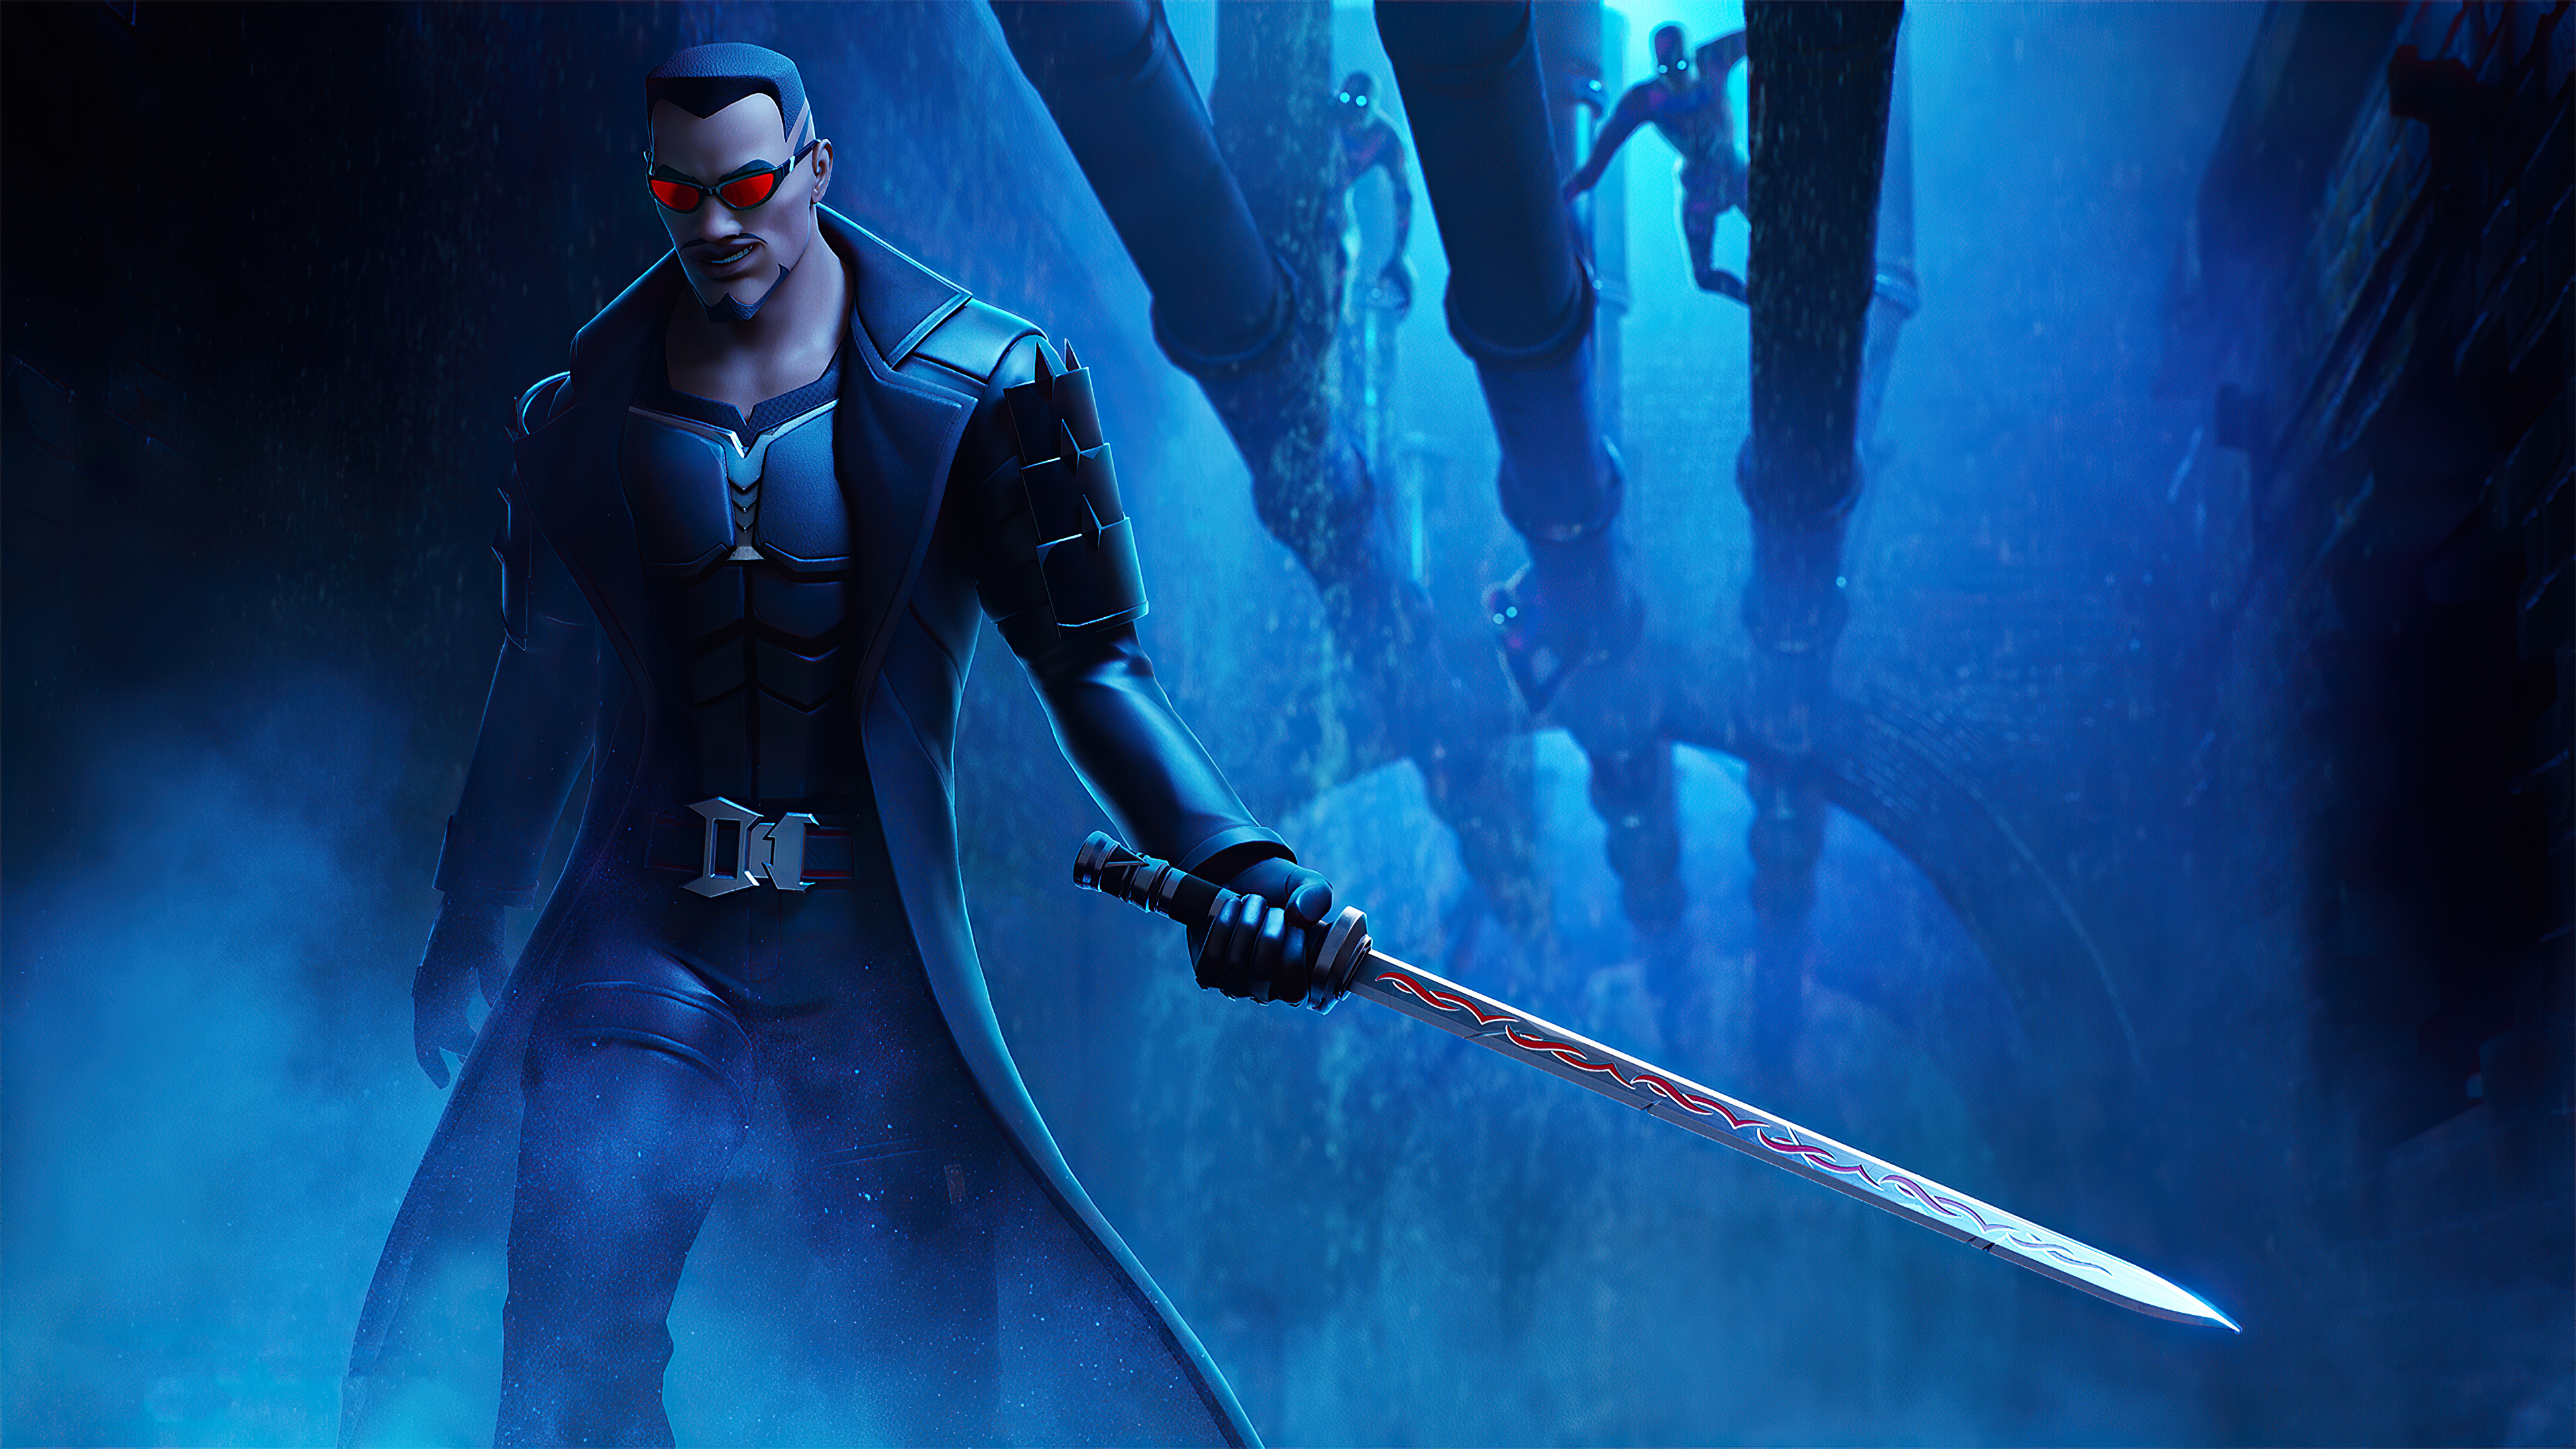 Blade Marvel Ics HD Wallpaper And Background